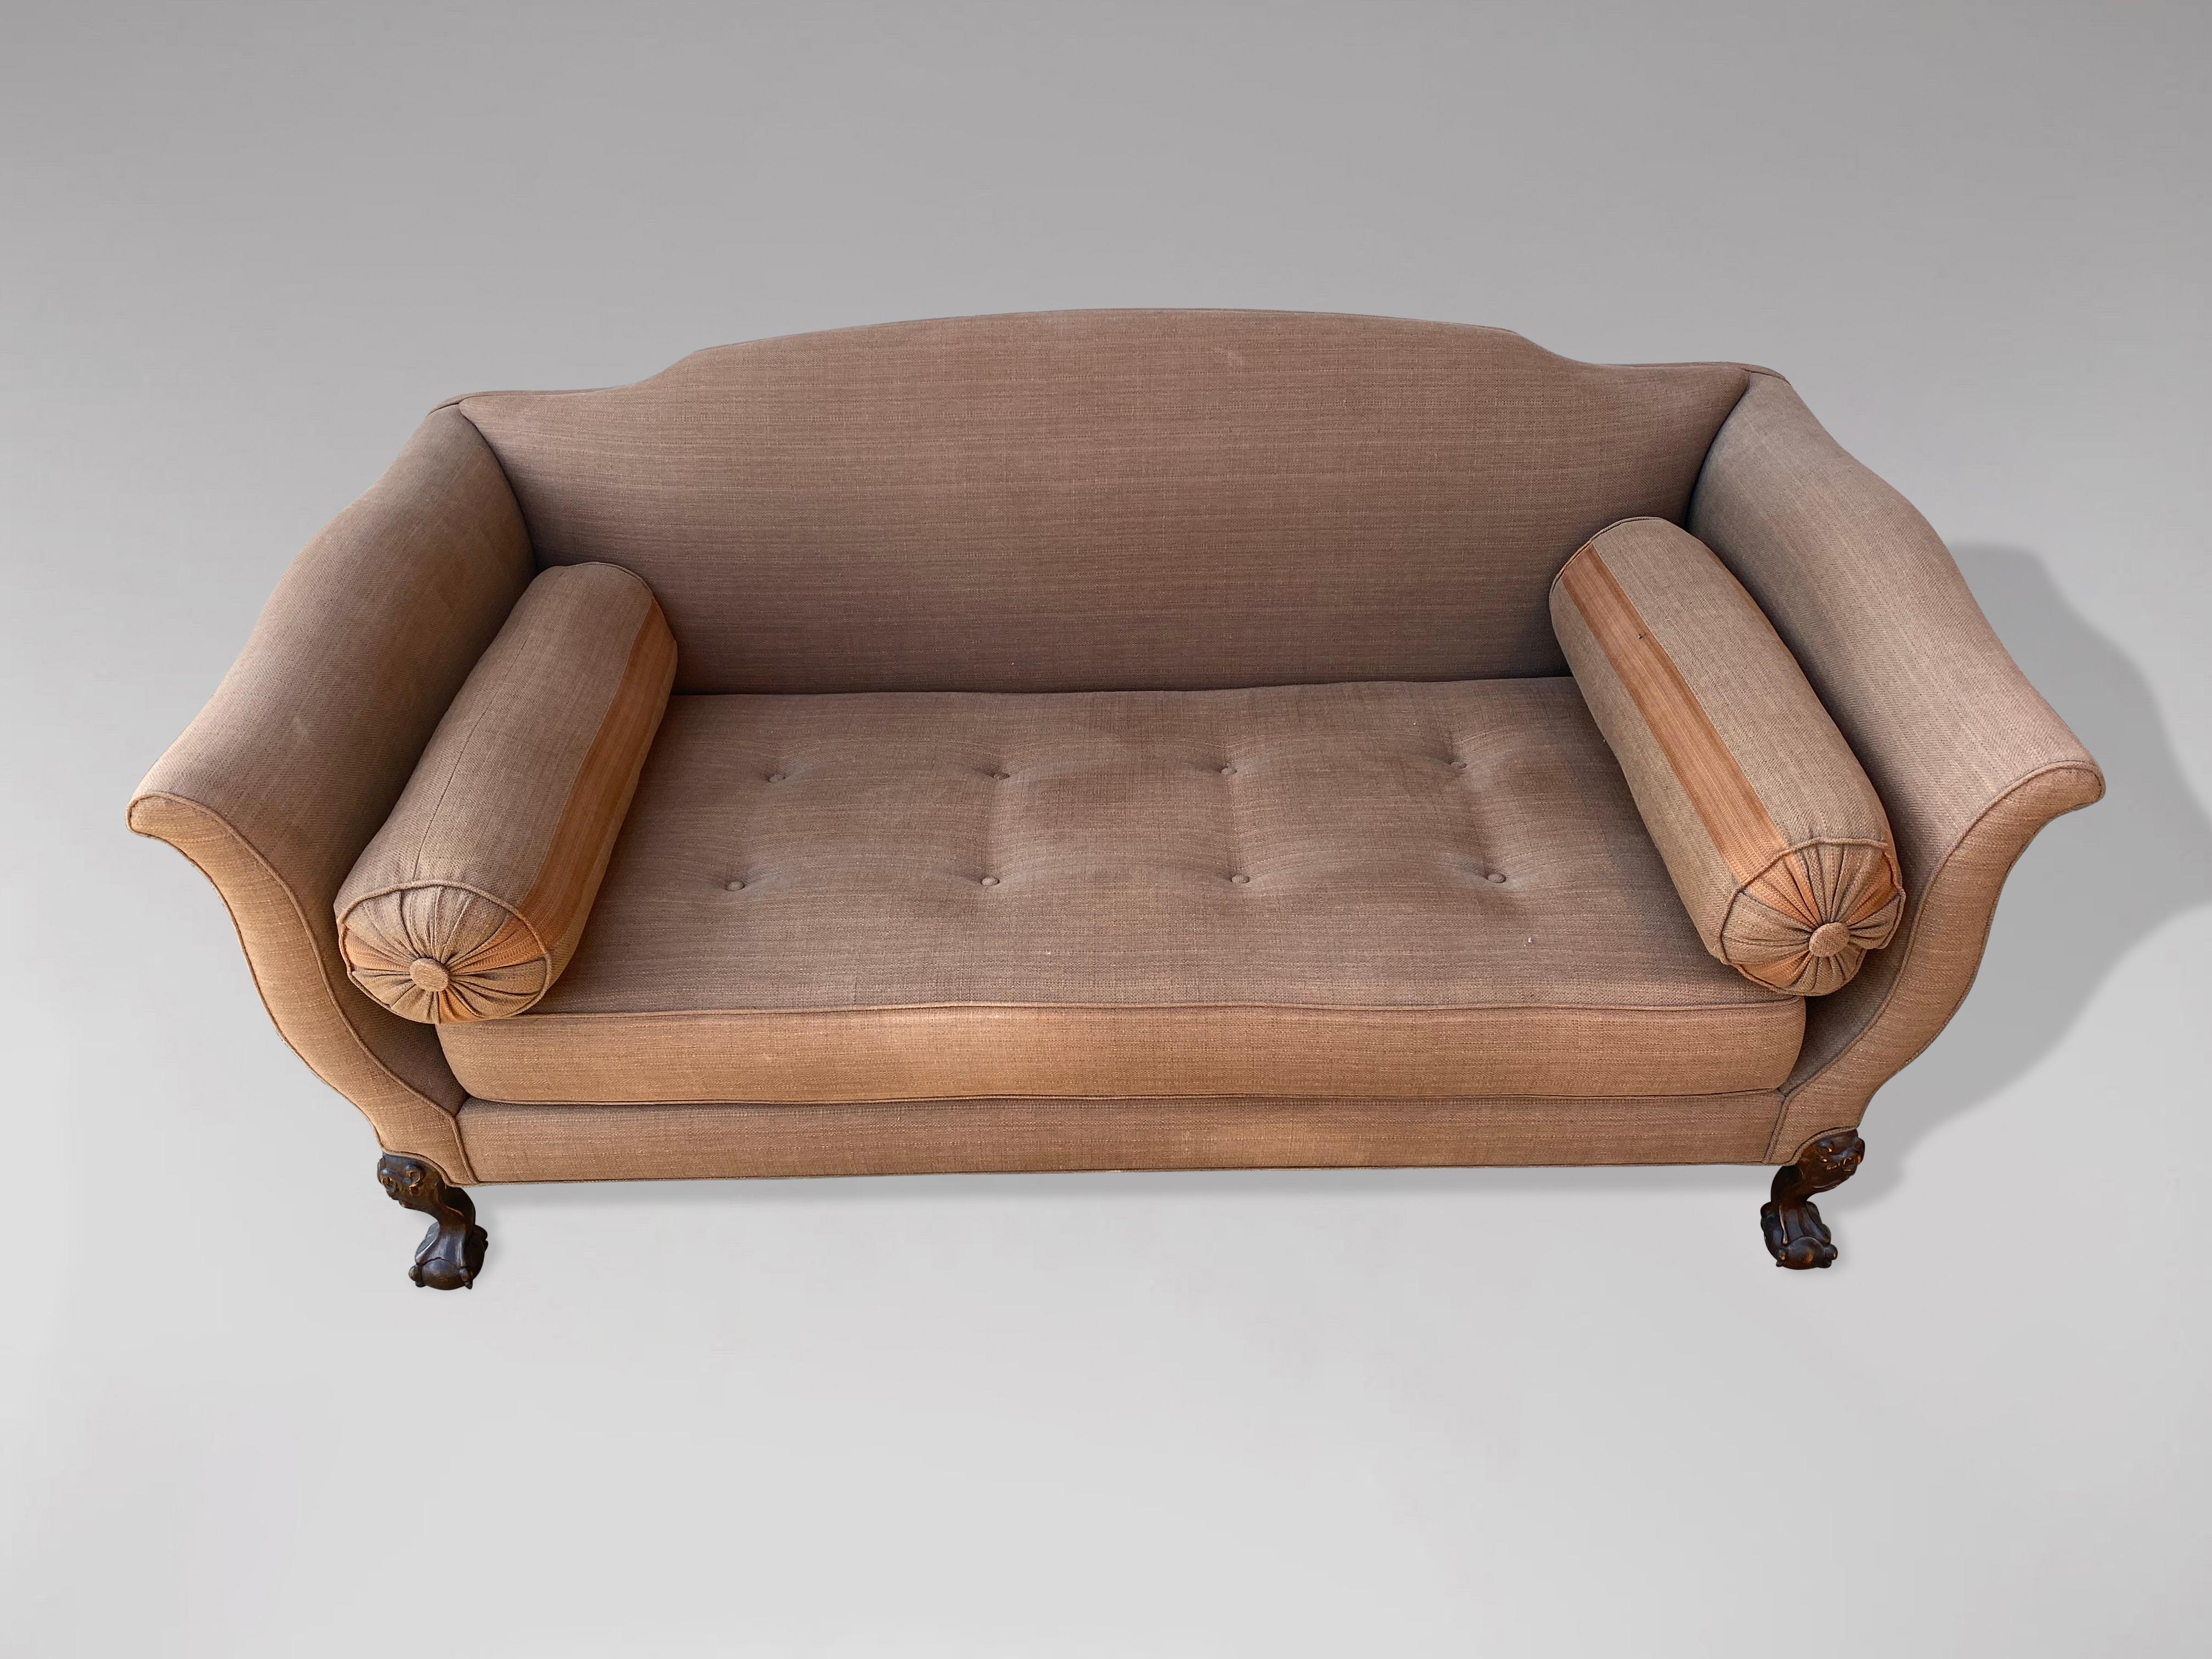 20th Century Edwardian Period Reupholstered Camel Back Sofa 1